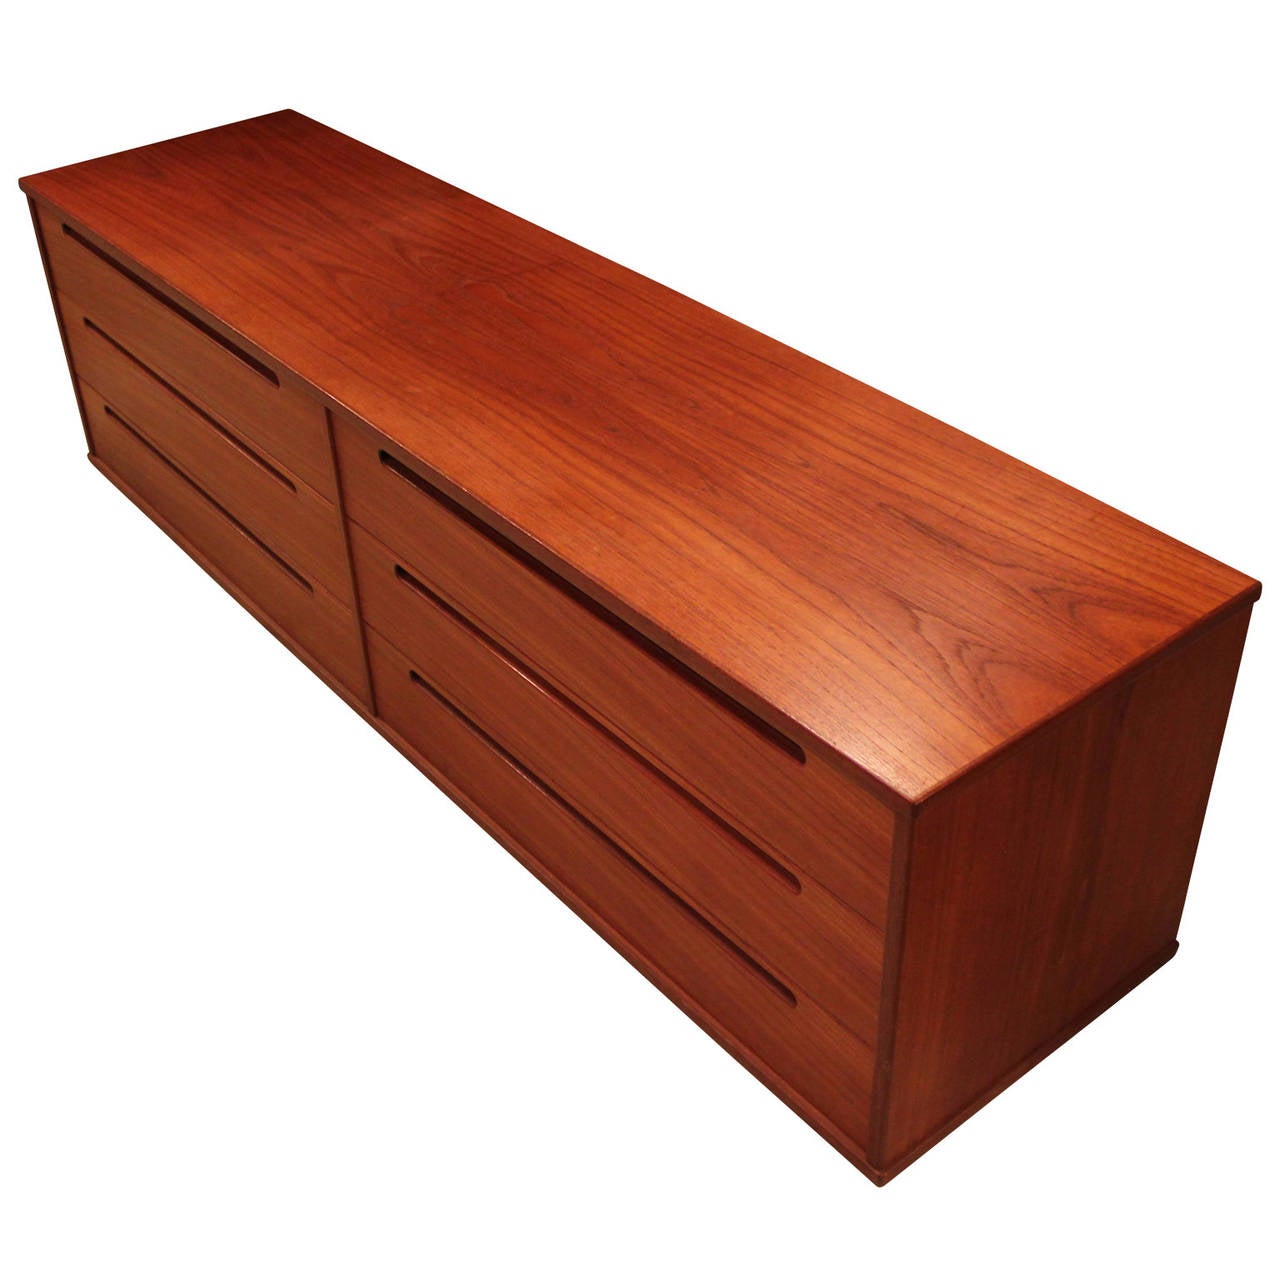 Long and low teak dresser / chest made in Denmark. Six drawers provide ample storage. Perfect at the end of a bed.